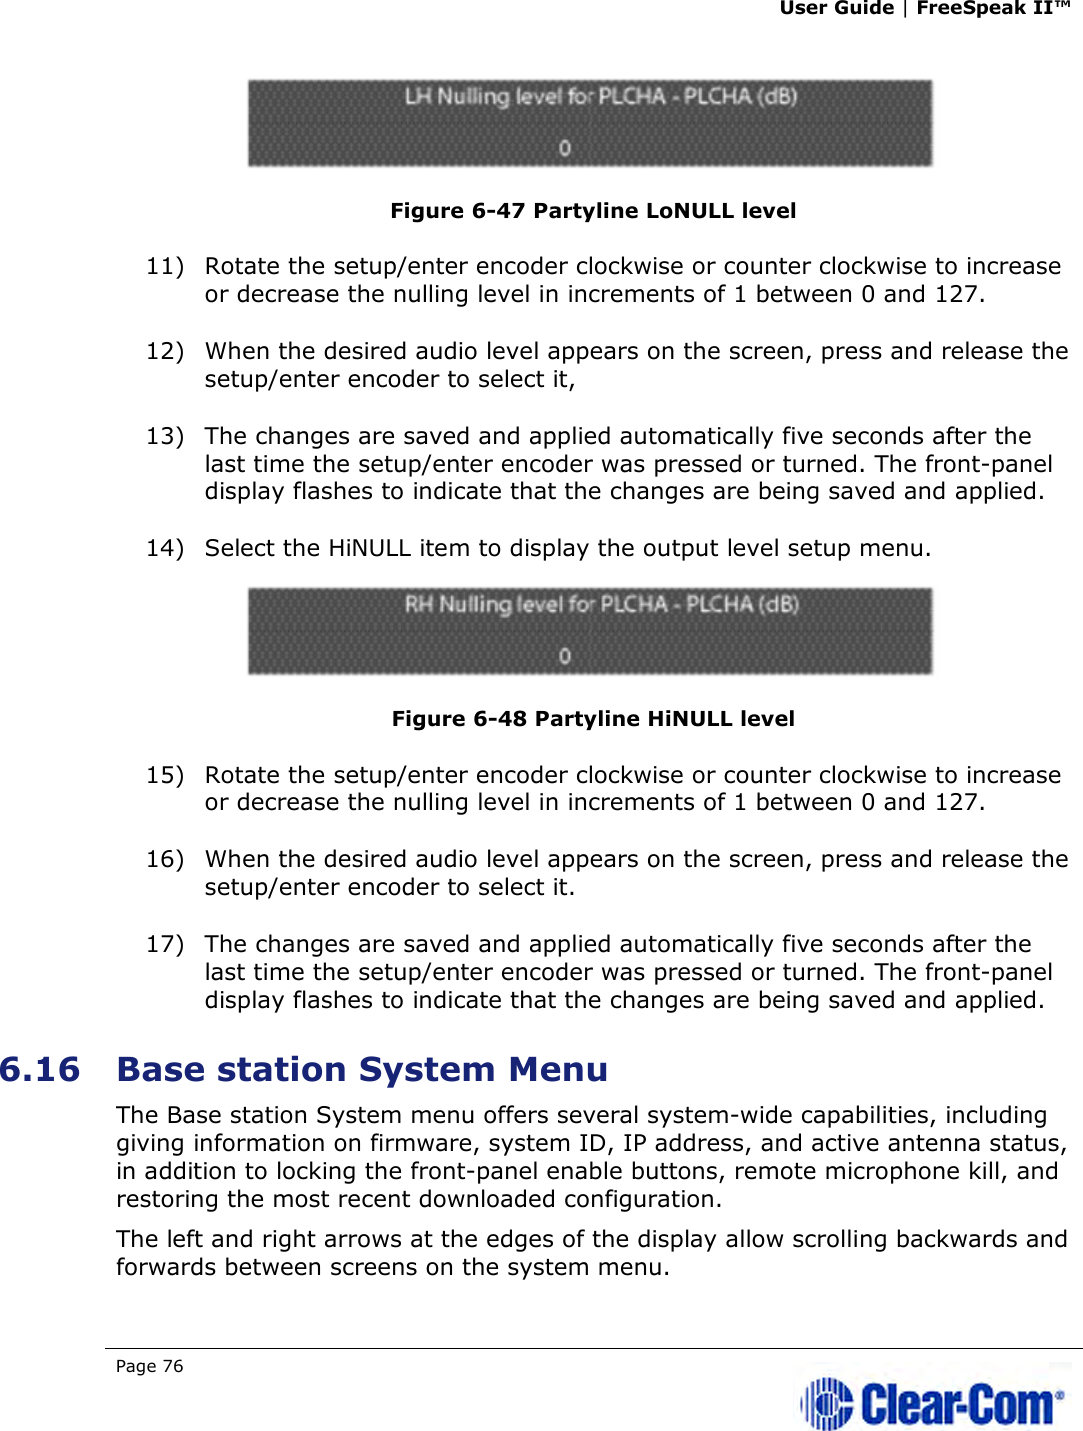 User Guide | FreeSpeak II™  Page 76    Figure 6-47 Partyline LoNULL level 11) Rotate the setup/enter encoder clockwise or counter clockwise to increase or decrease the nulling level in increments of 1 between 0 and 127.  12) When the desired audio level appears on the screen, press and release the setup/enter encoder to select it,  13) The changes are saved and applied automatically five seconds after the last time the setup/enter encoder was pressed or turned. The front-panel display flashes to indicate that the changes are being saved and applied.  14) Select the HiNULL item to display the output level setup menu.  Figure 6-48 Partyline HiNULL level 15) Rotate the setup/enter encoder clockwise or counter clockwise to increase or decrease the nulling level in increments of 1 between 0 and 127.  16) When the desired audio level appears on the screen, press and release the setup/enter encoder to select it. 17) The changes are saved and applied automatically five seconds after the last time the setup/enter encoder was pressed or turned. The front-panel display flashes to indicate that the changes are being saved and applied.  6.16 Base station System Menu The Base station System menu offers several system-wide capabilities, including giving information on firmware, system ID, IP address, and active antenna status, in addition to locking the front-panel enable buttons, remote microphone kill, and restoring the most recent downloaded configuration.  The left and right arrows at the edges of the display allow scrolling backwards and forwards between screens on the system menu. 